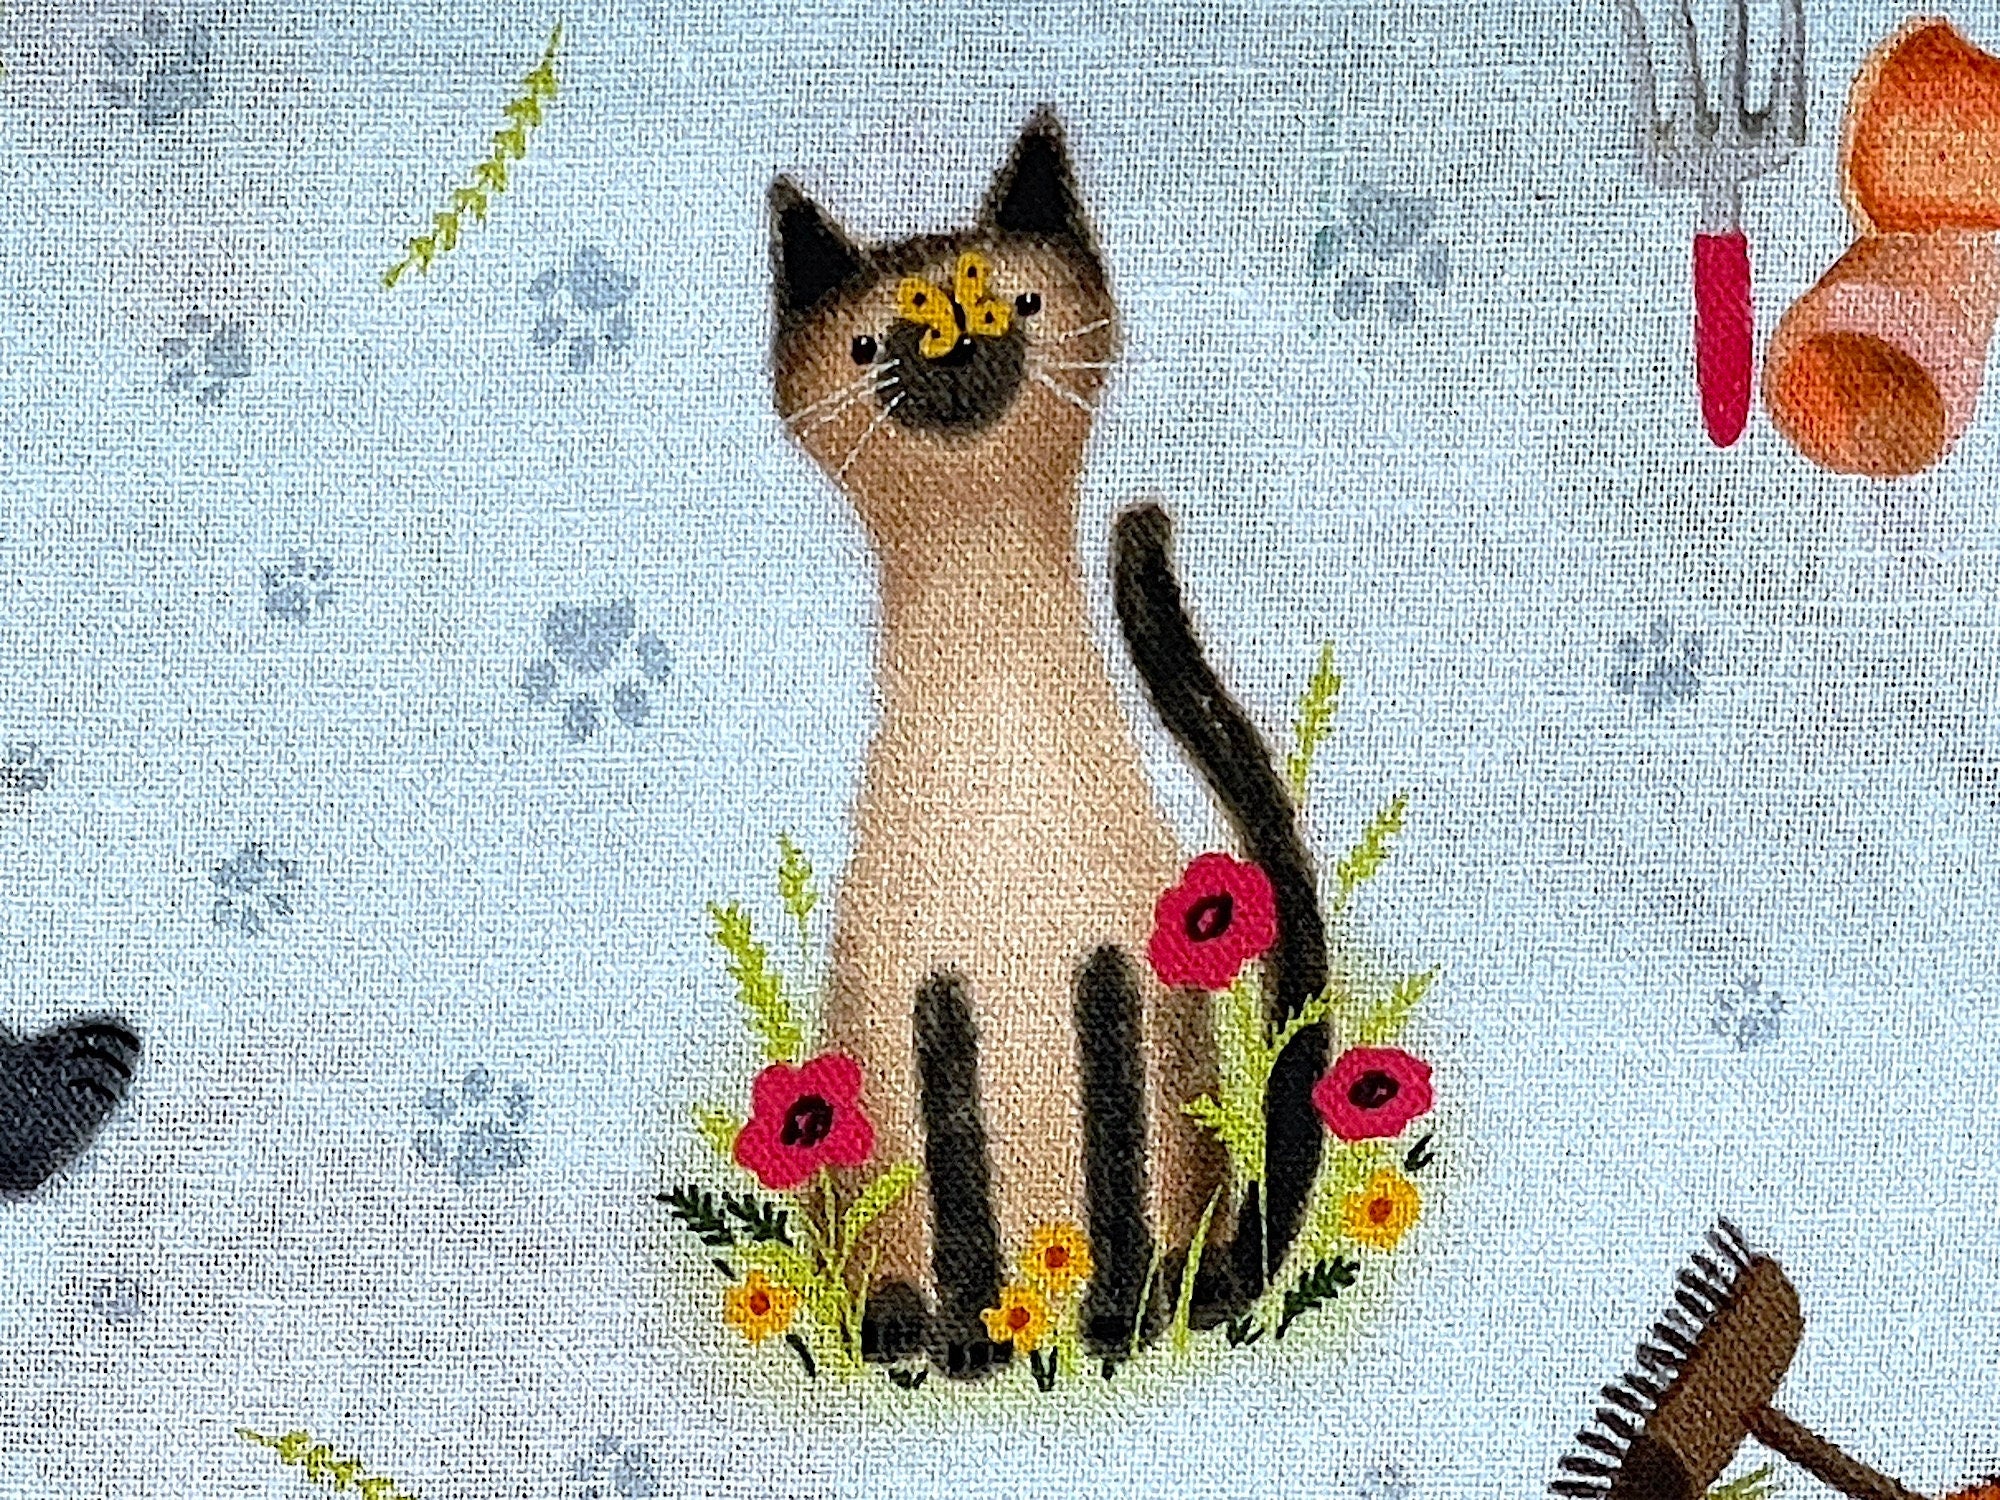 Close up of a Siamese cat sitting amongst the flowers with a butterfly on it's nose.